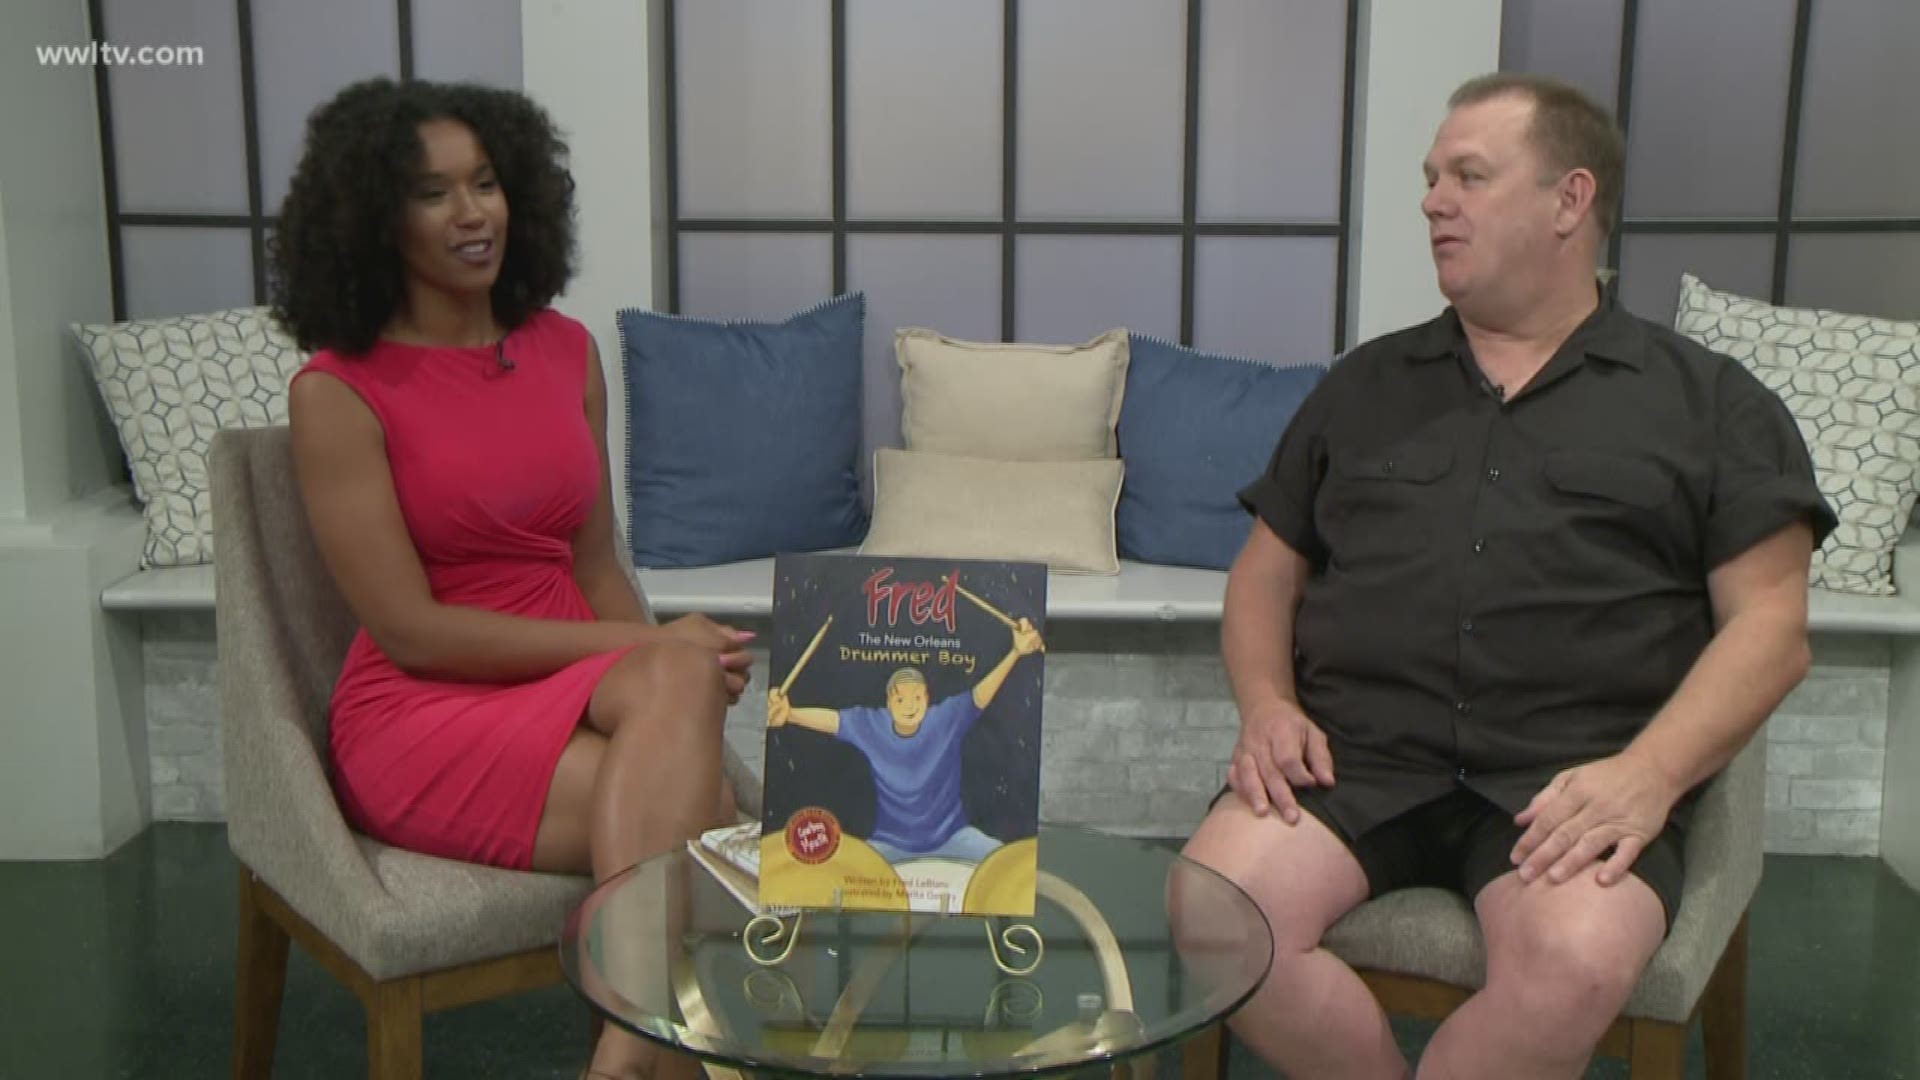 We are sitting down with Musician and Author, Fred LeBlanc to talk about all the great things happening including new music and his new children's book.